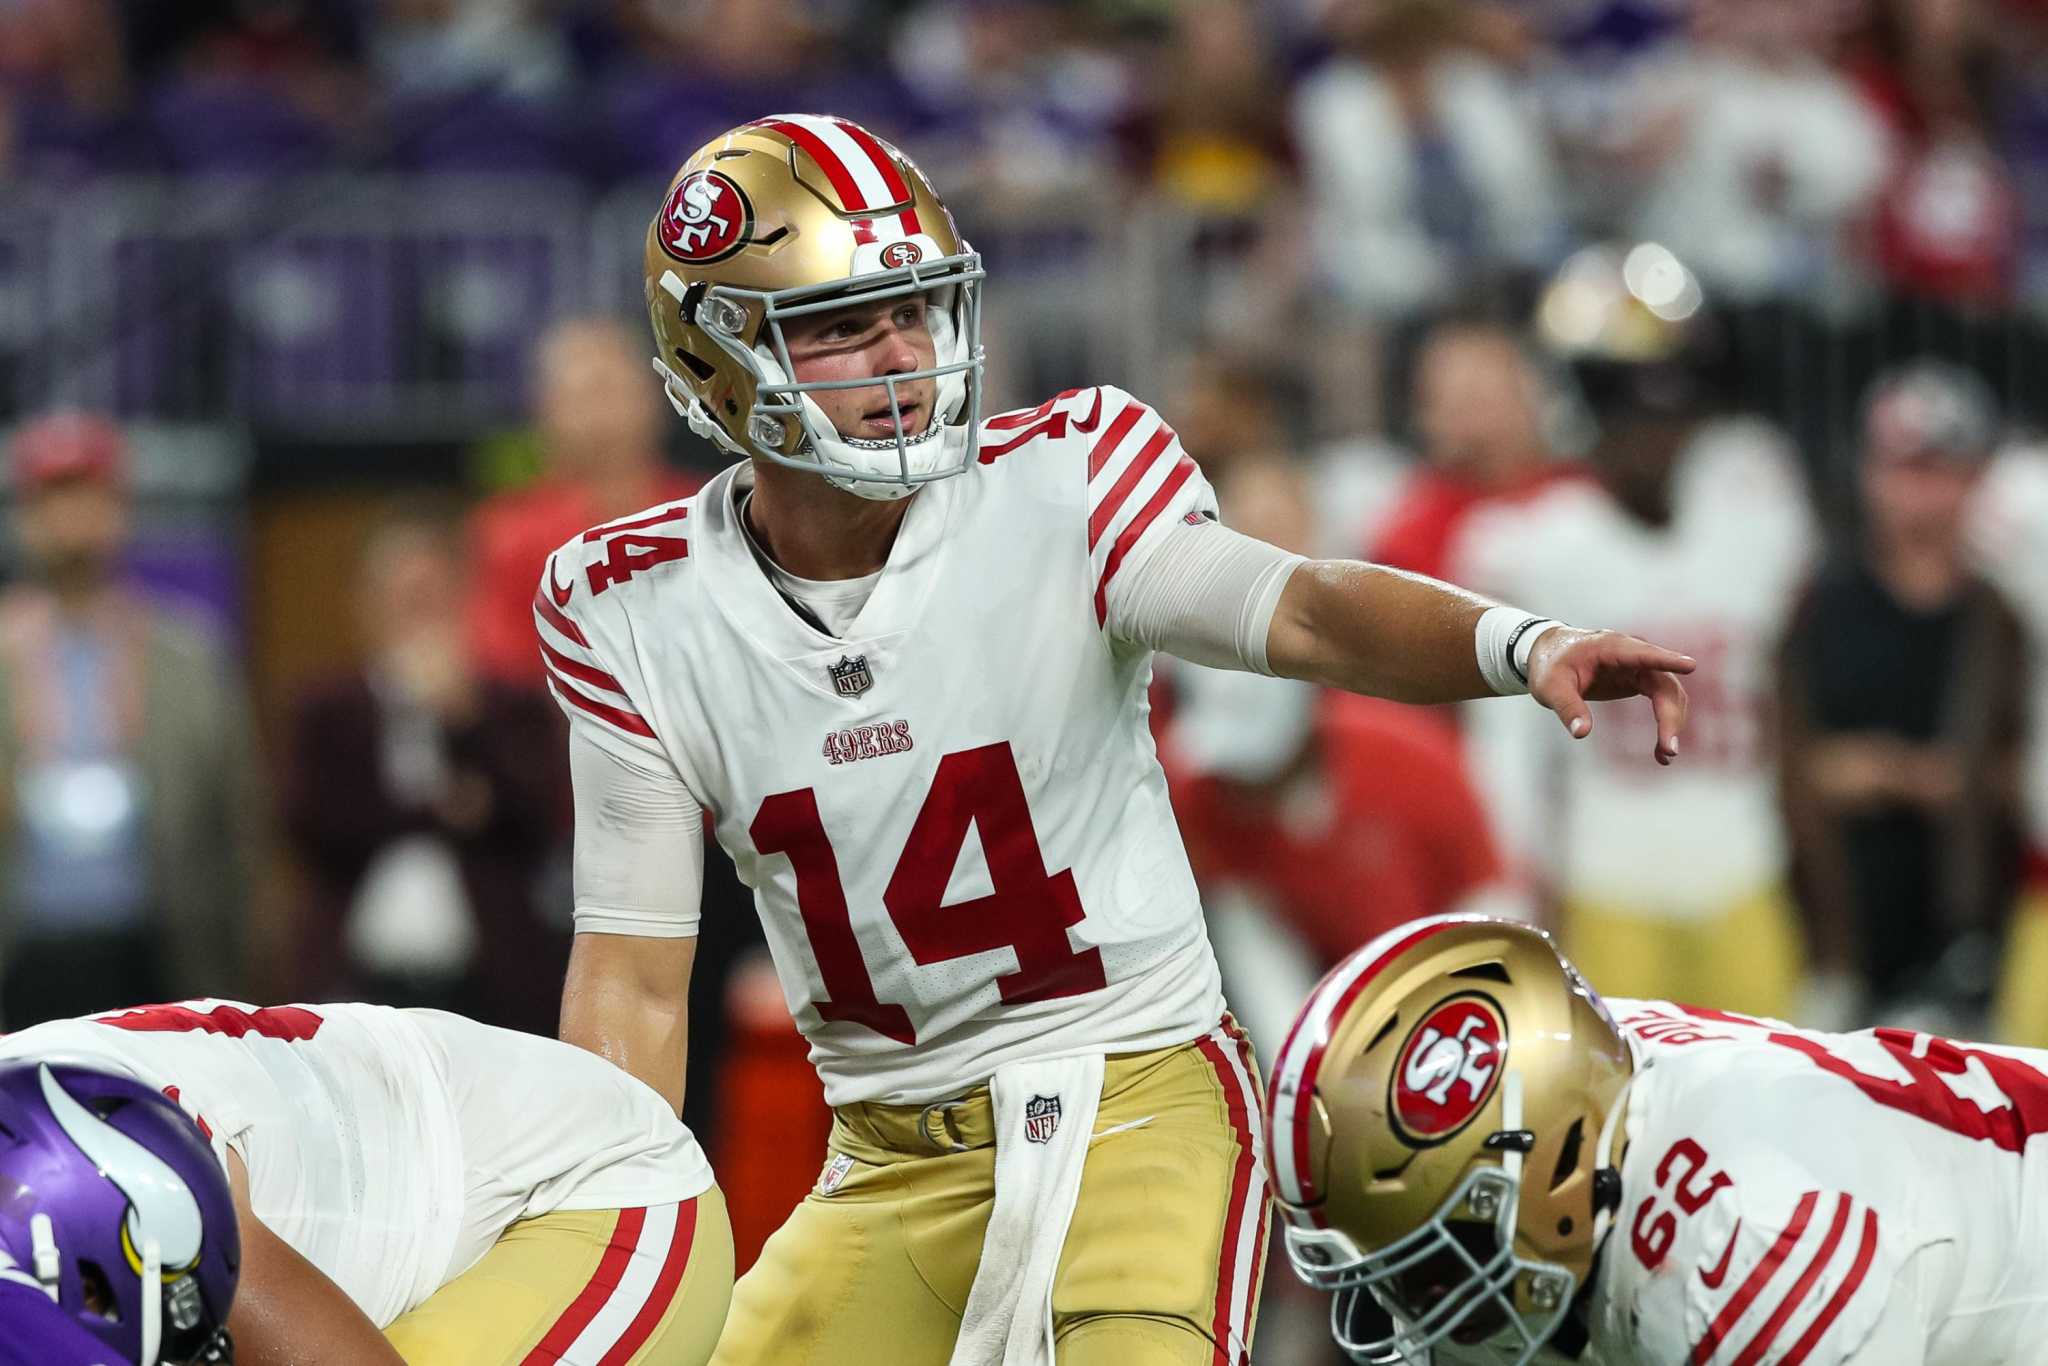 49ers QB Brock Purdy on his Offensive Rookie of the Year odds